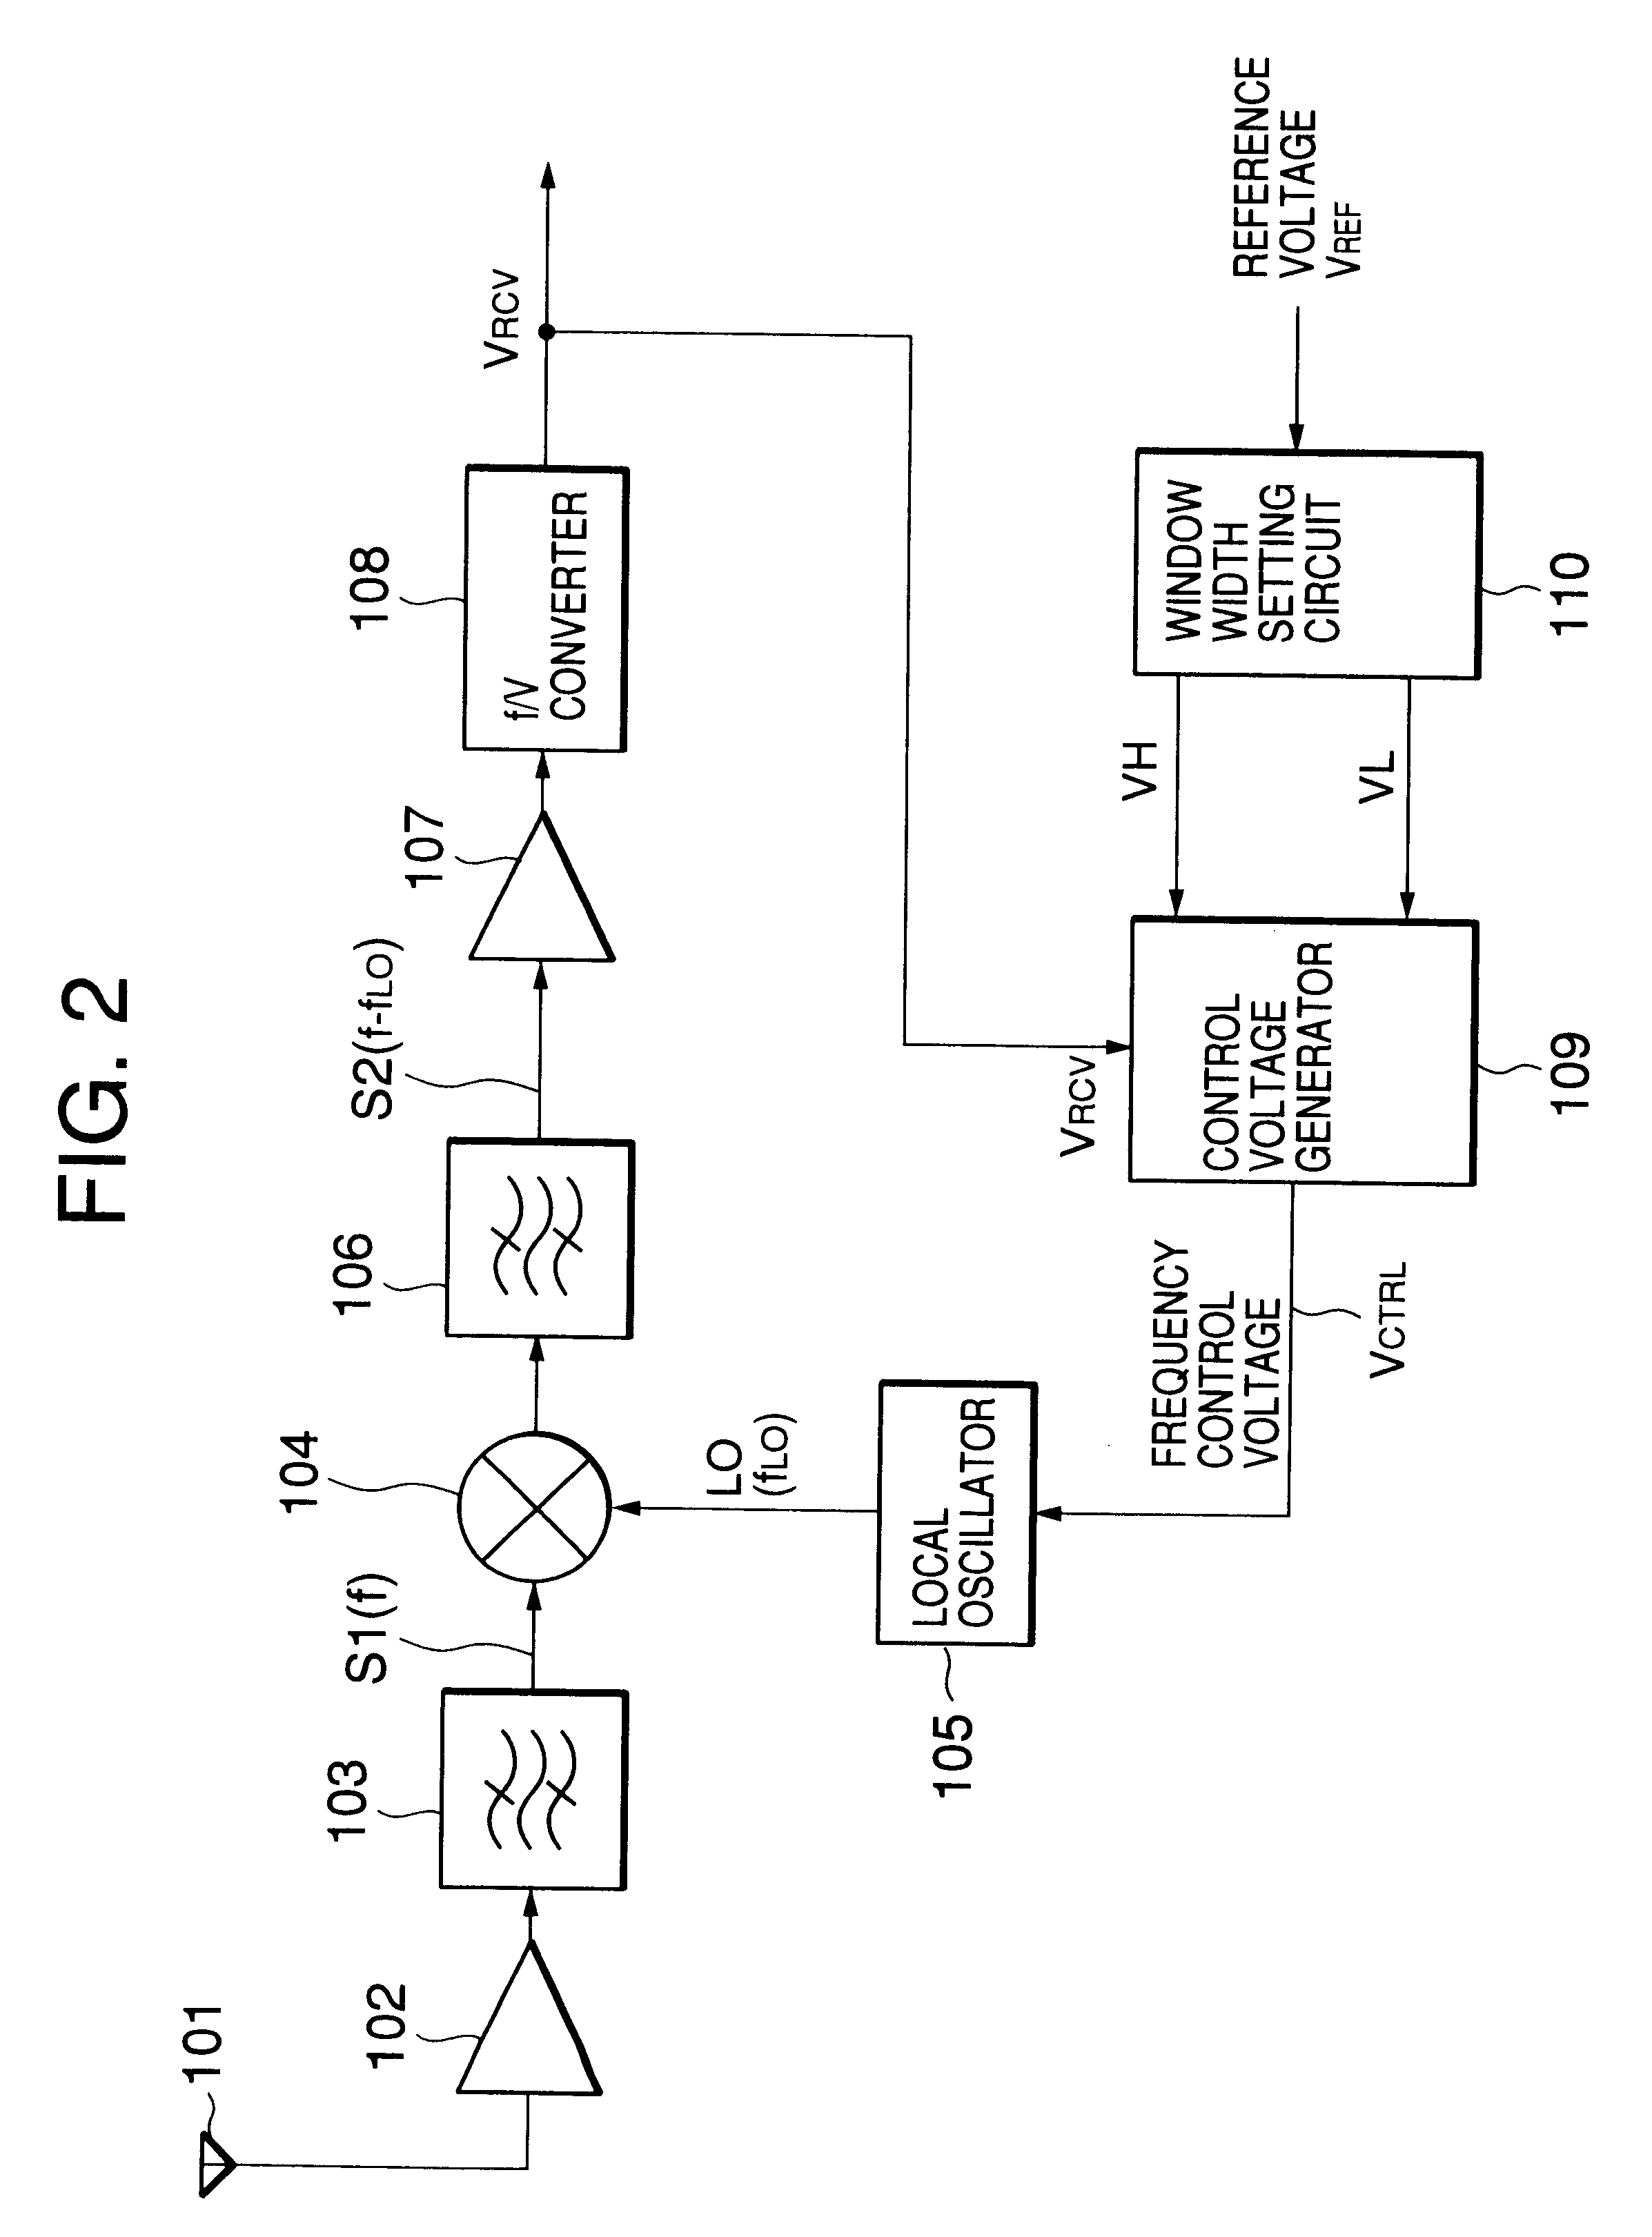 Automatic frequency control in FSK receiver using voltage window deviation